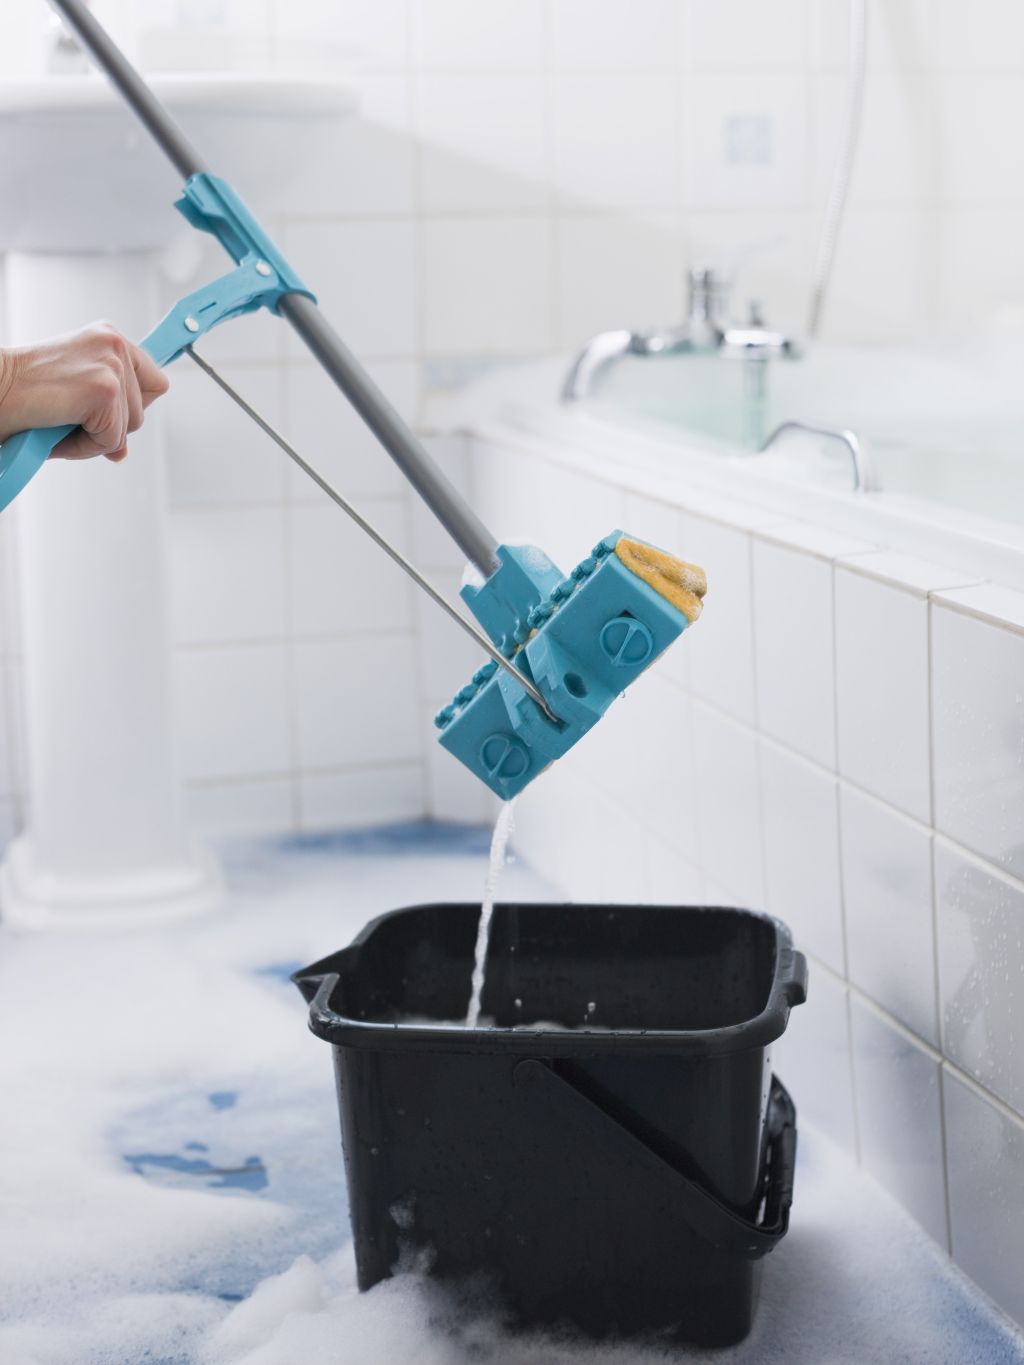 Seventeen per cent of people despised mopping. Photo: iStock